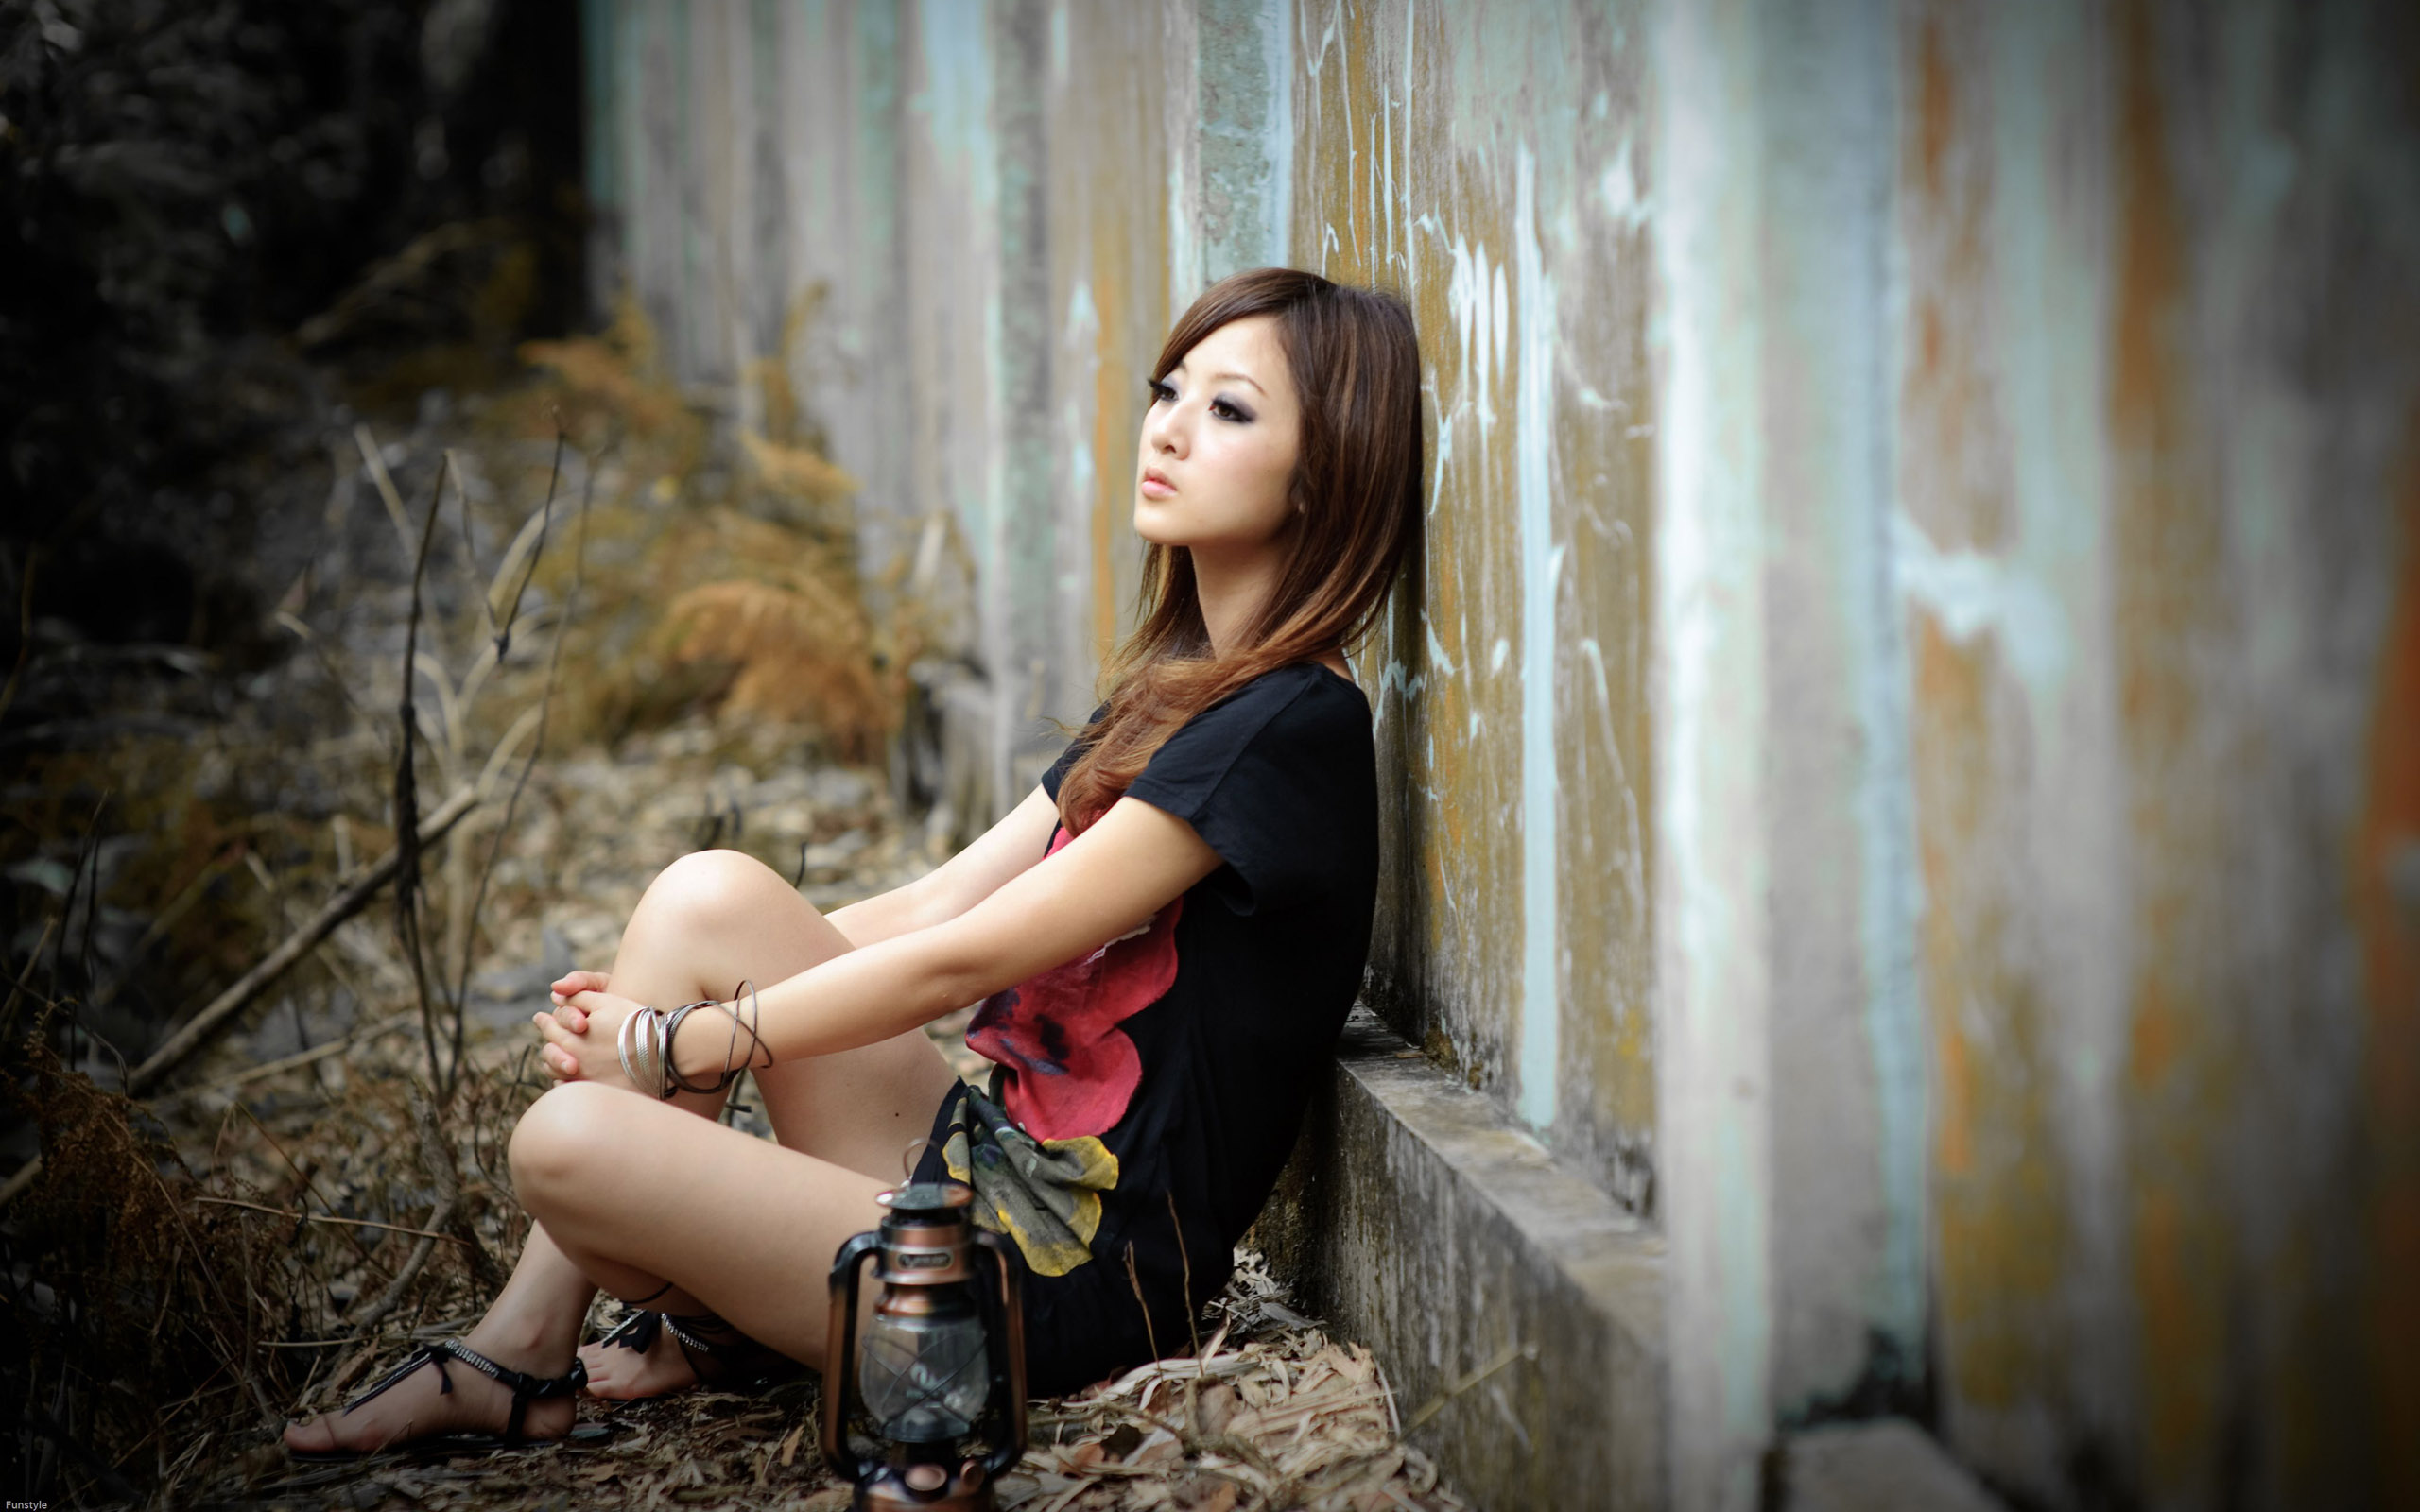 Sad Alone Girl Sitting Wallpapers - HD Wallpapers